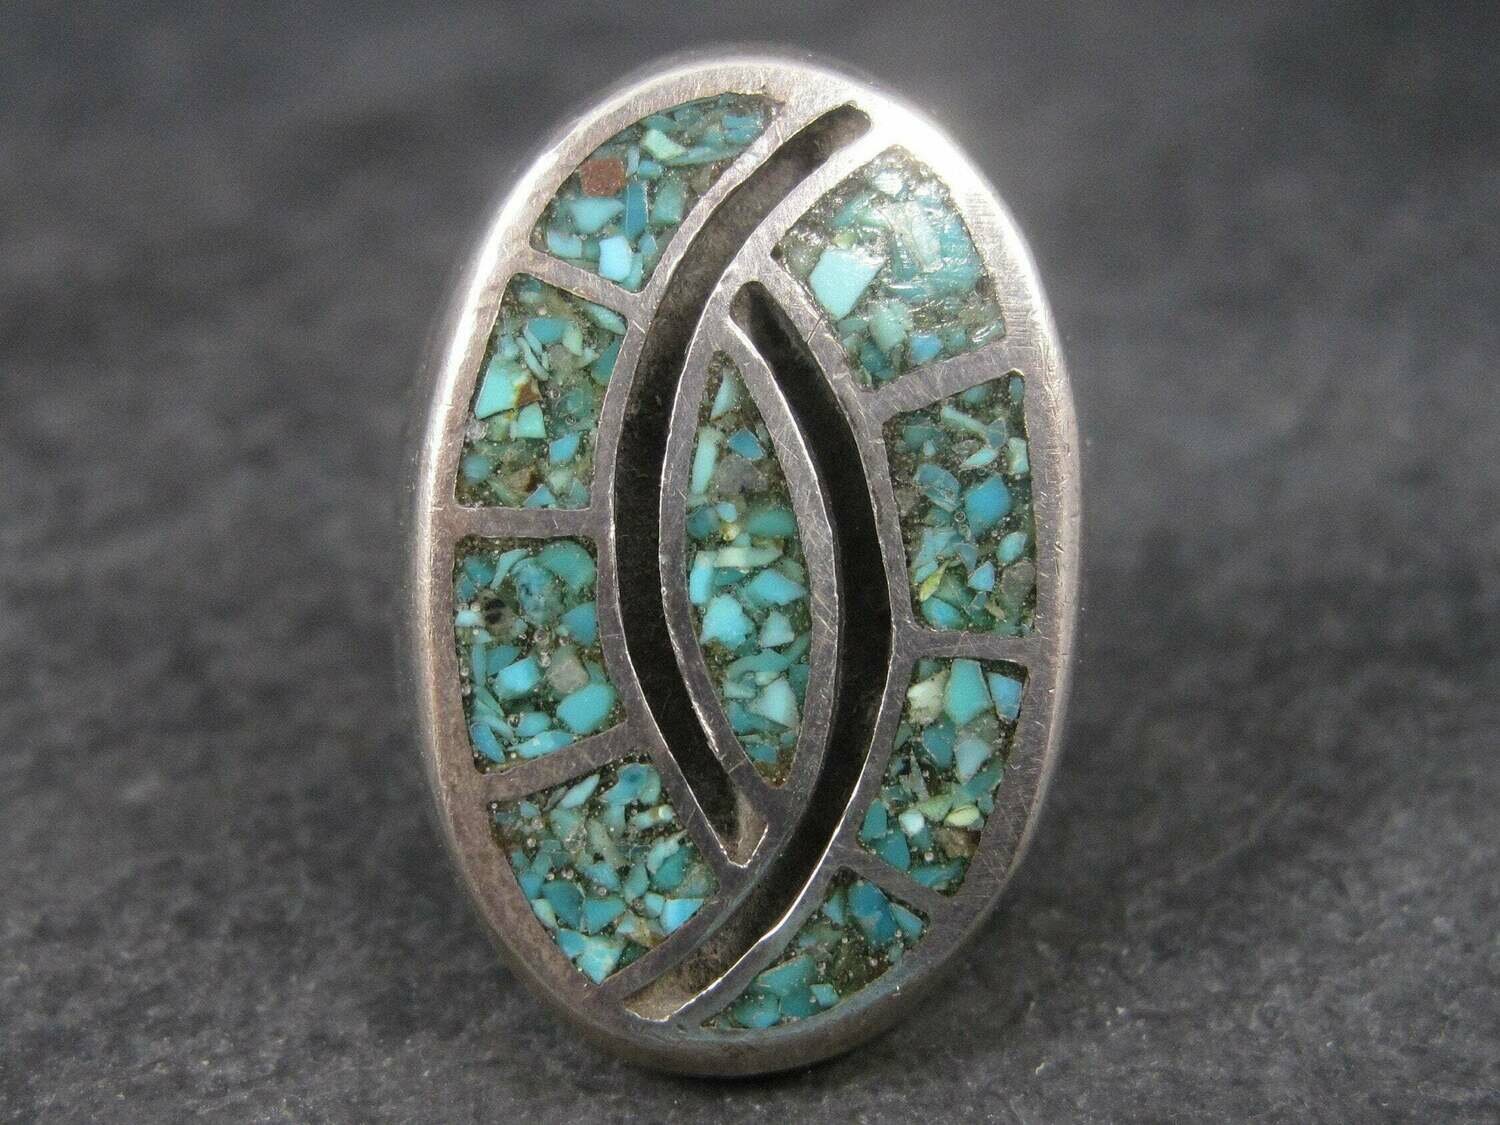 Vintage Southwestern Turquoise Chip Inlay Ring Size 9.5